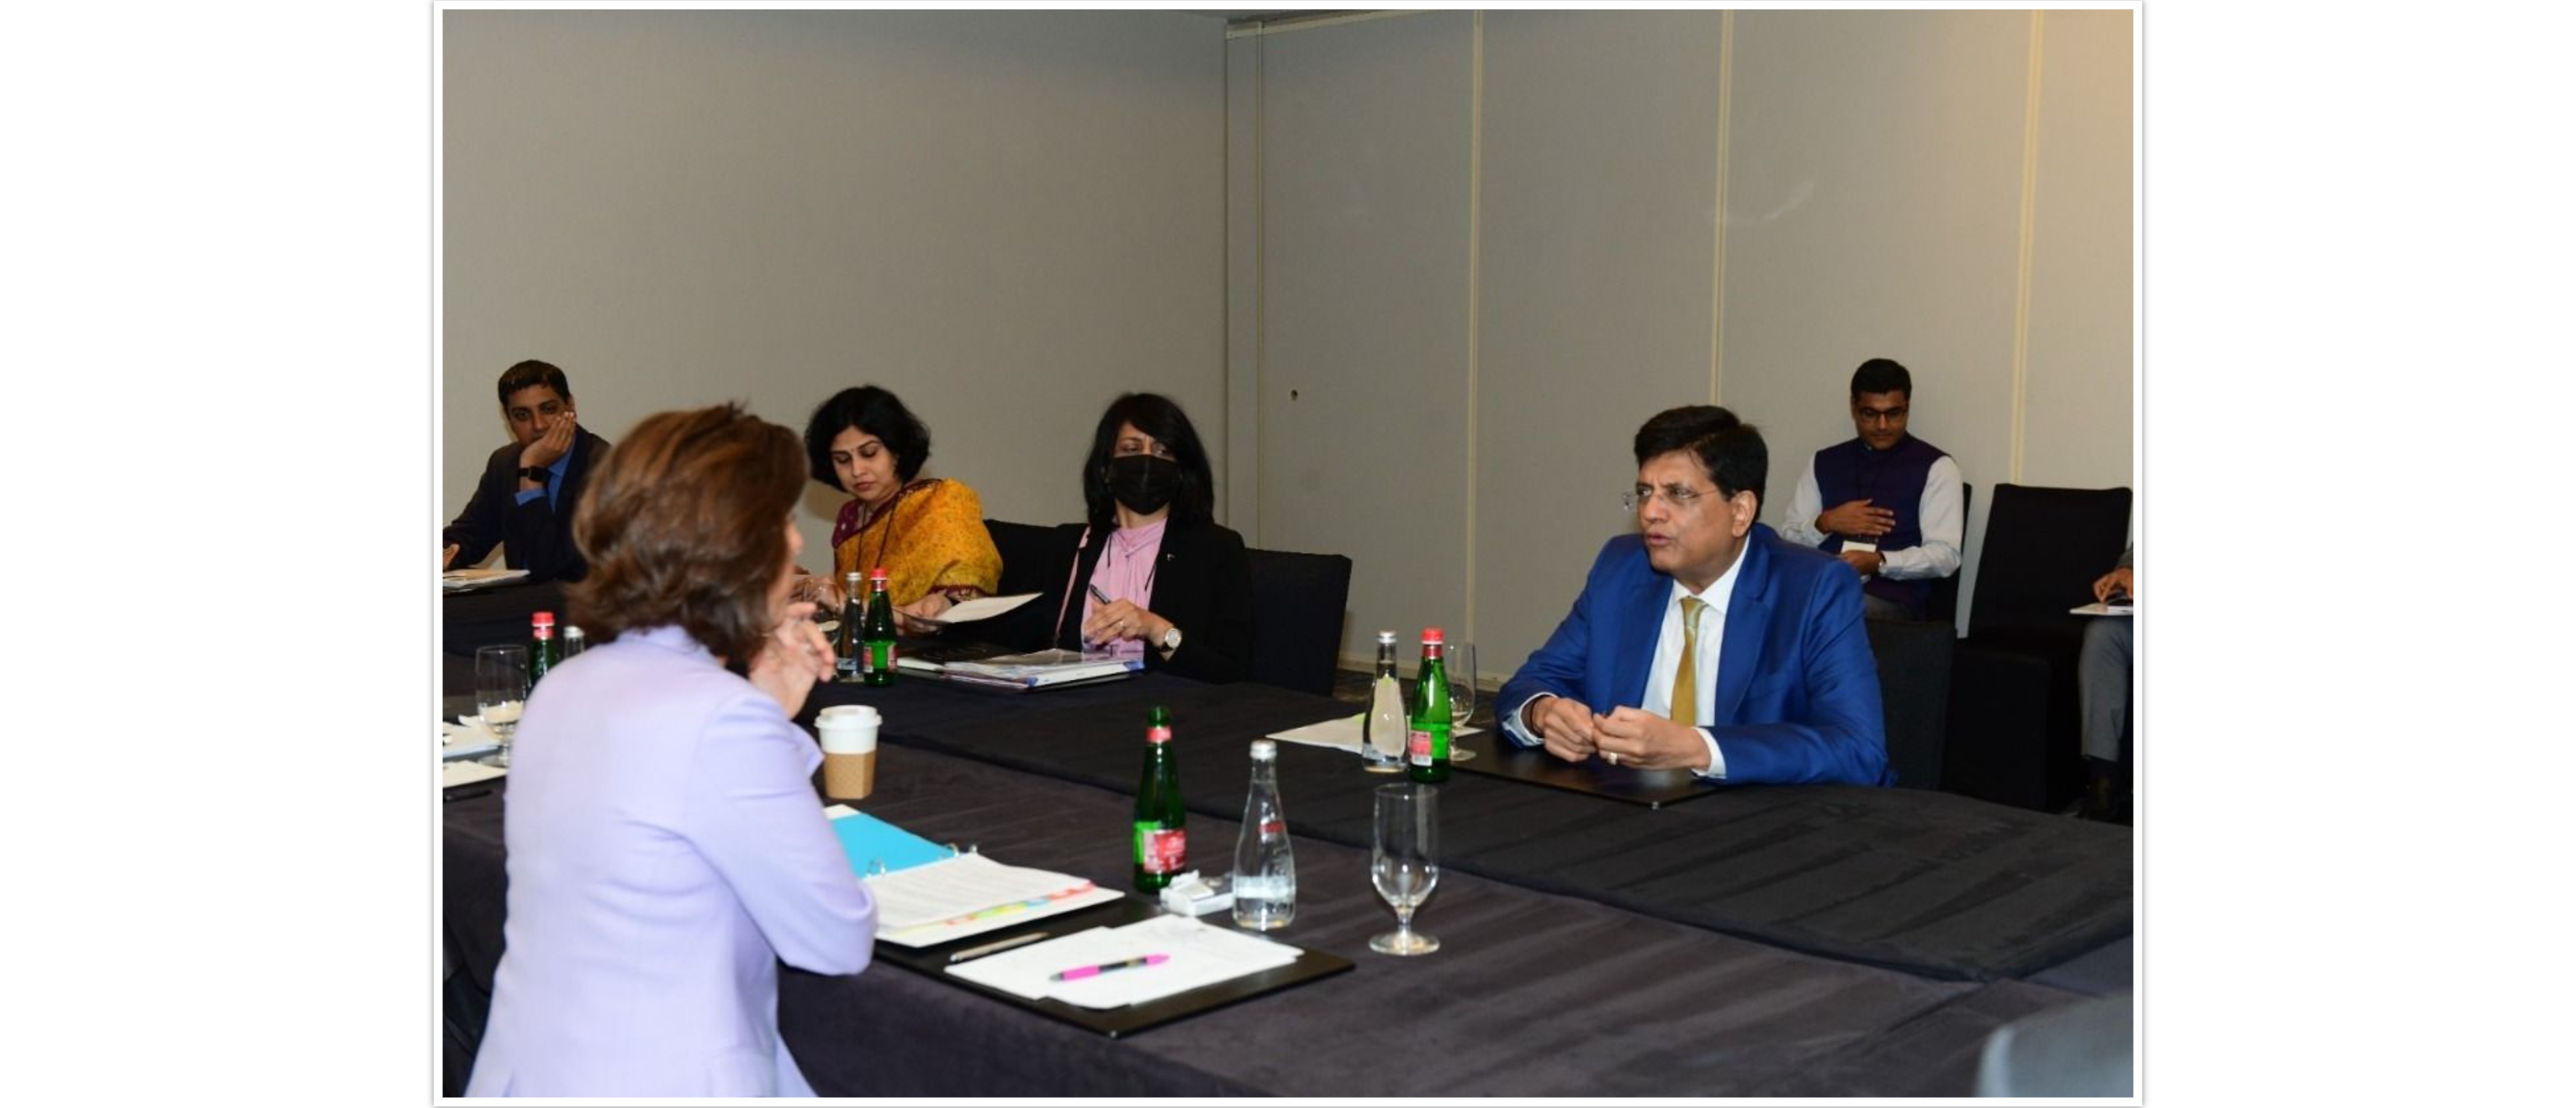  Union Minister of Commerce and Industry, Consumer Affairs, Food and Public Distribution and Textiles, Mr. Piyush Goyal met US Commerce Secretary Gina Raimondo in Los Angeles on September 8, 2022